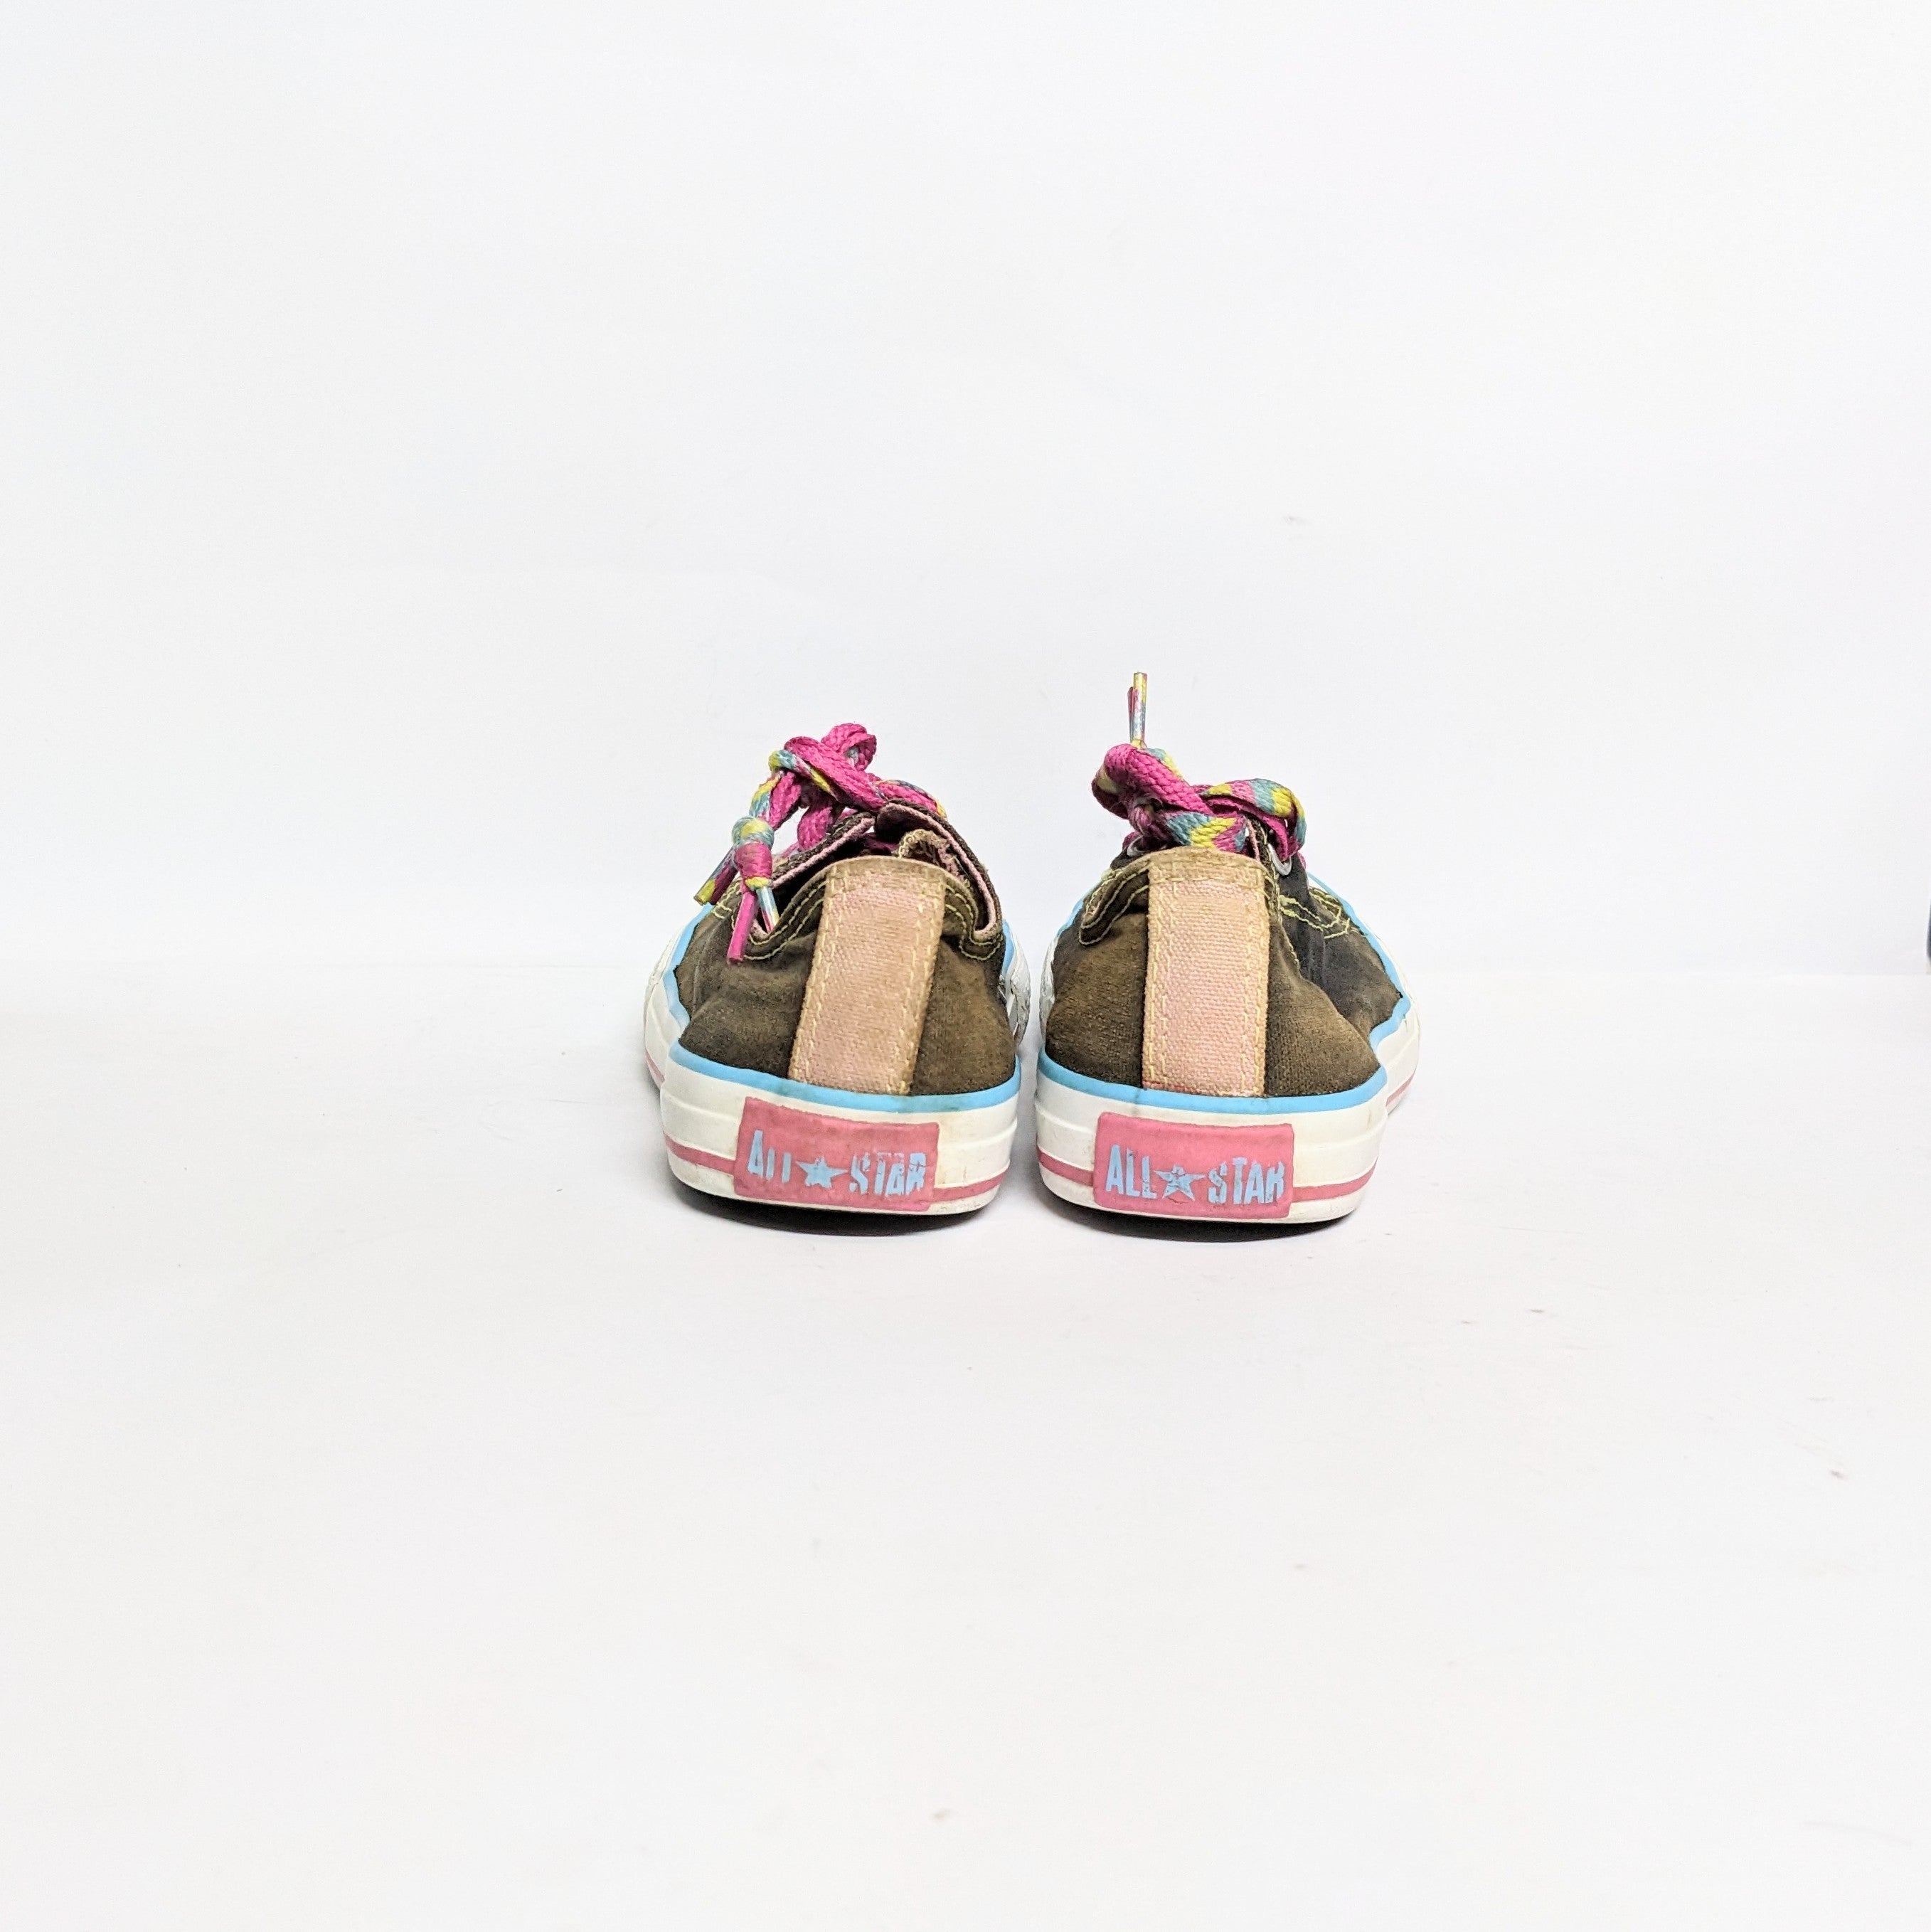 Converse Kids Sneakers grey with Pink Laces